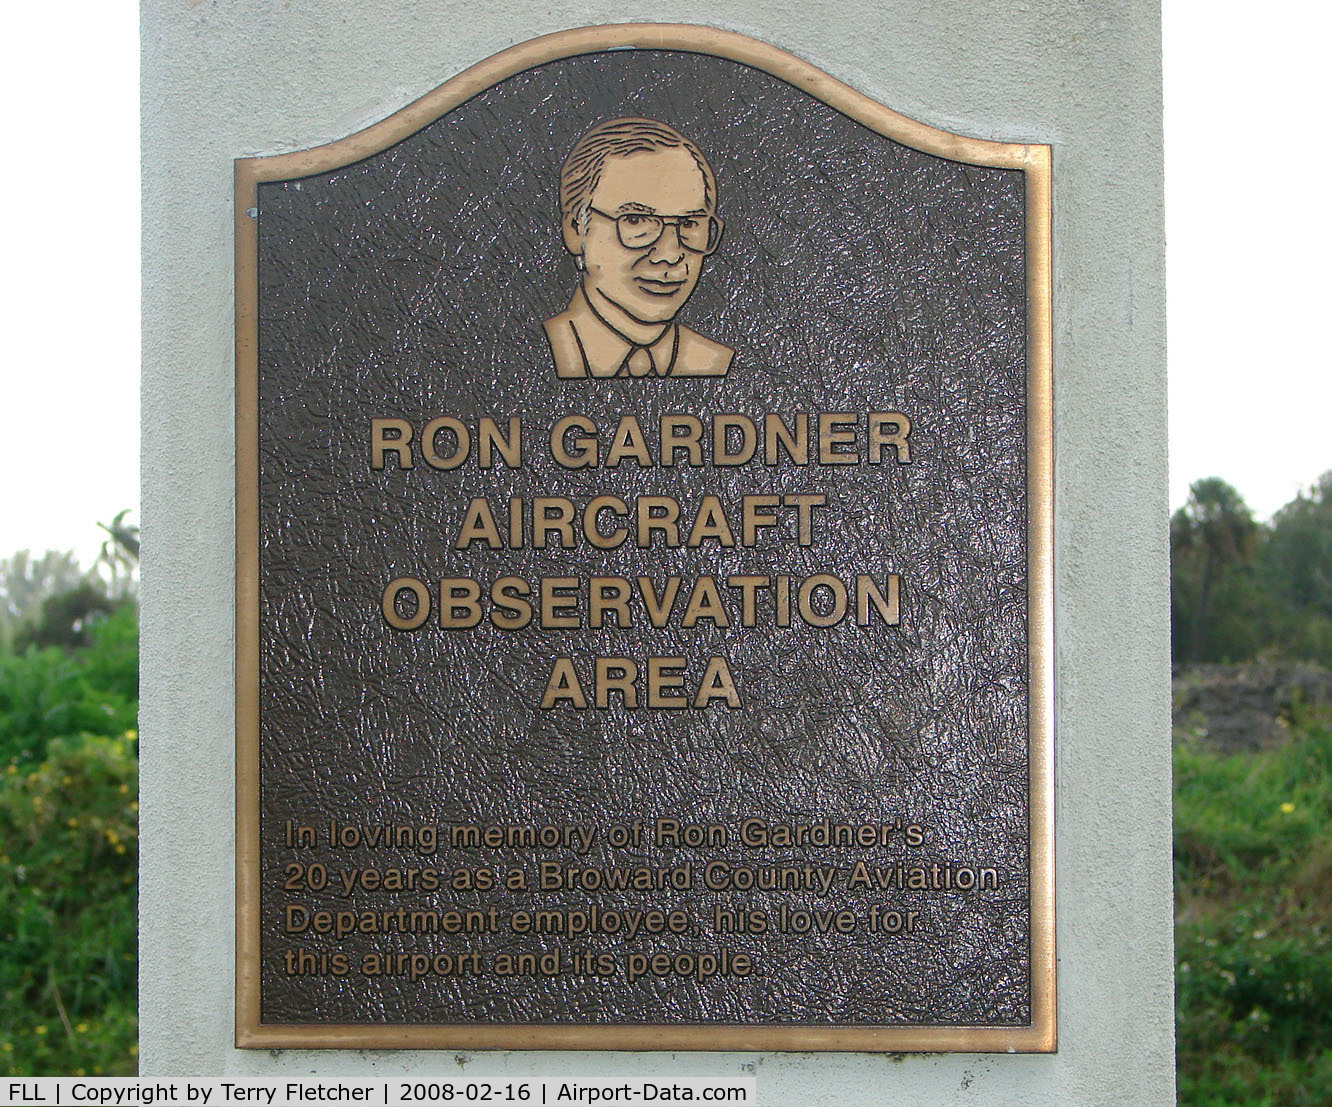 Fort Lauderdale/hollywood International Airport (FLL) - Aviation enthusiasts and photographers who visit the wonderful viewing area at the western threshold should take a moment to observe the plaque , dedicated to Ron Gardner, after whom the observation area is named